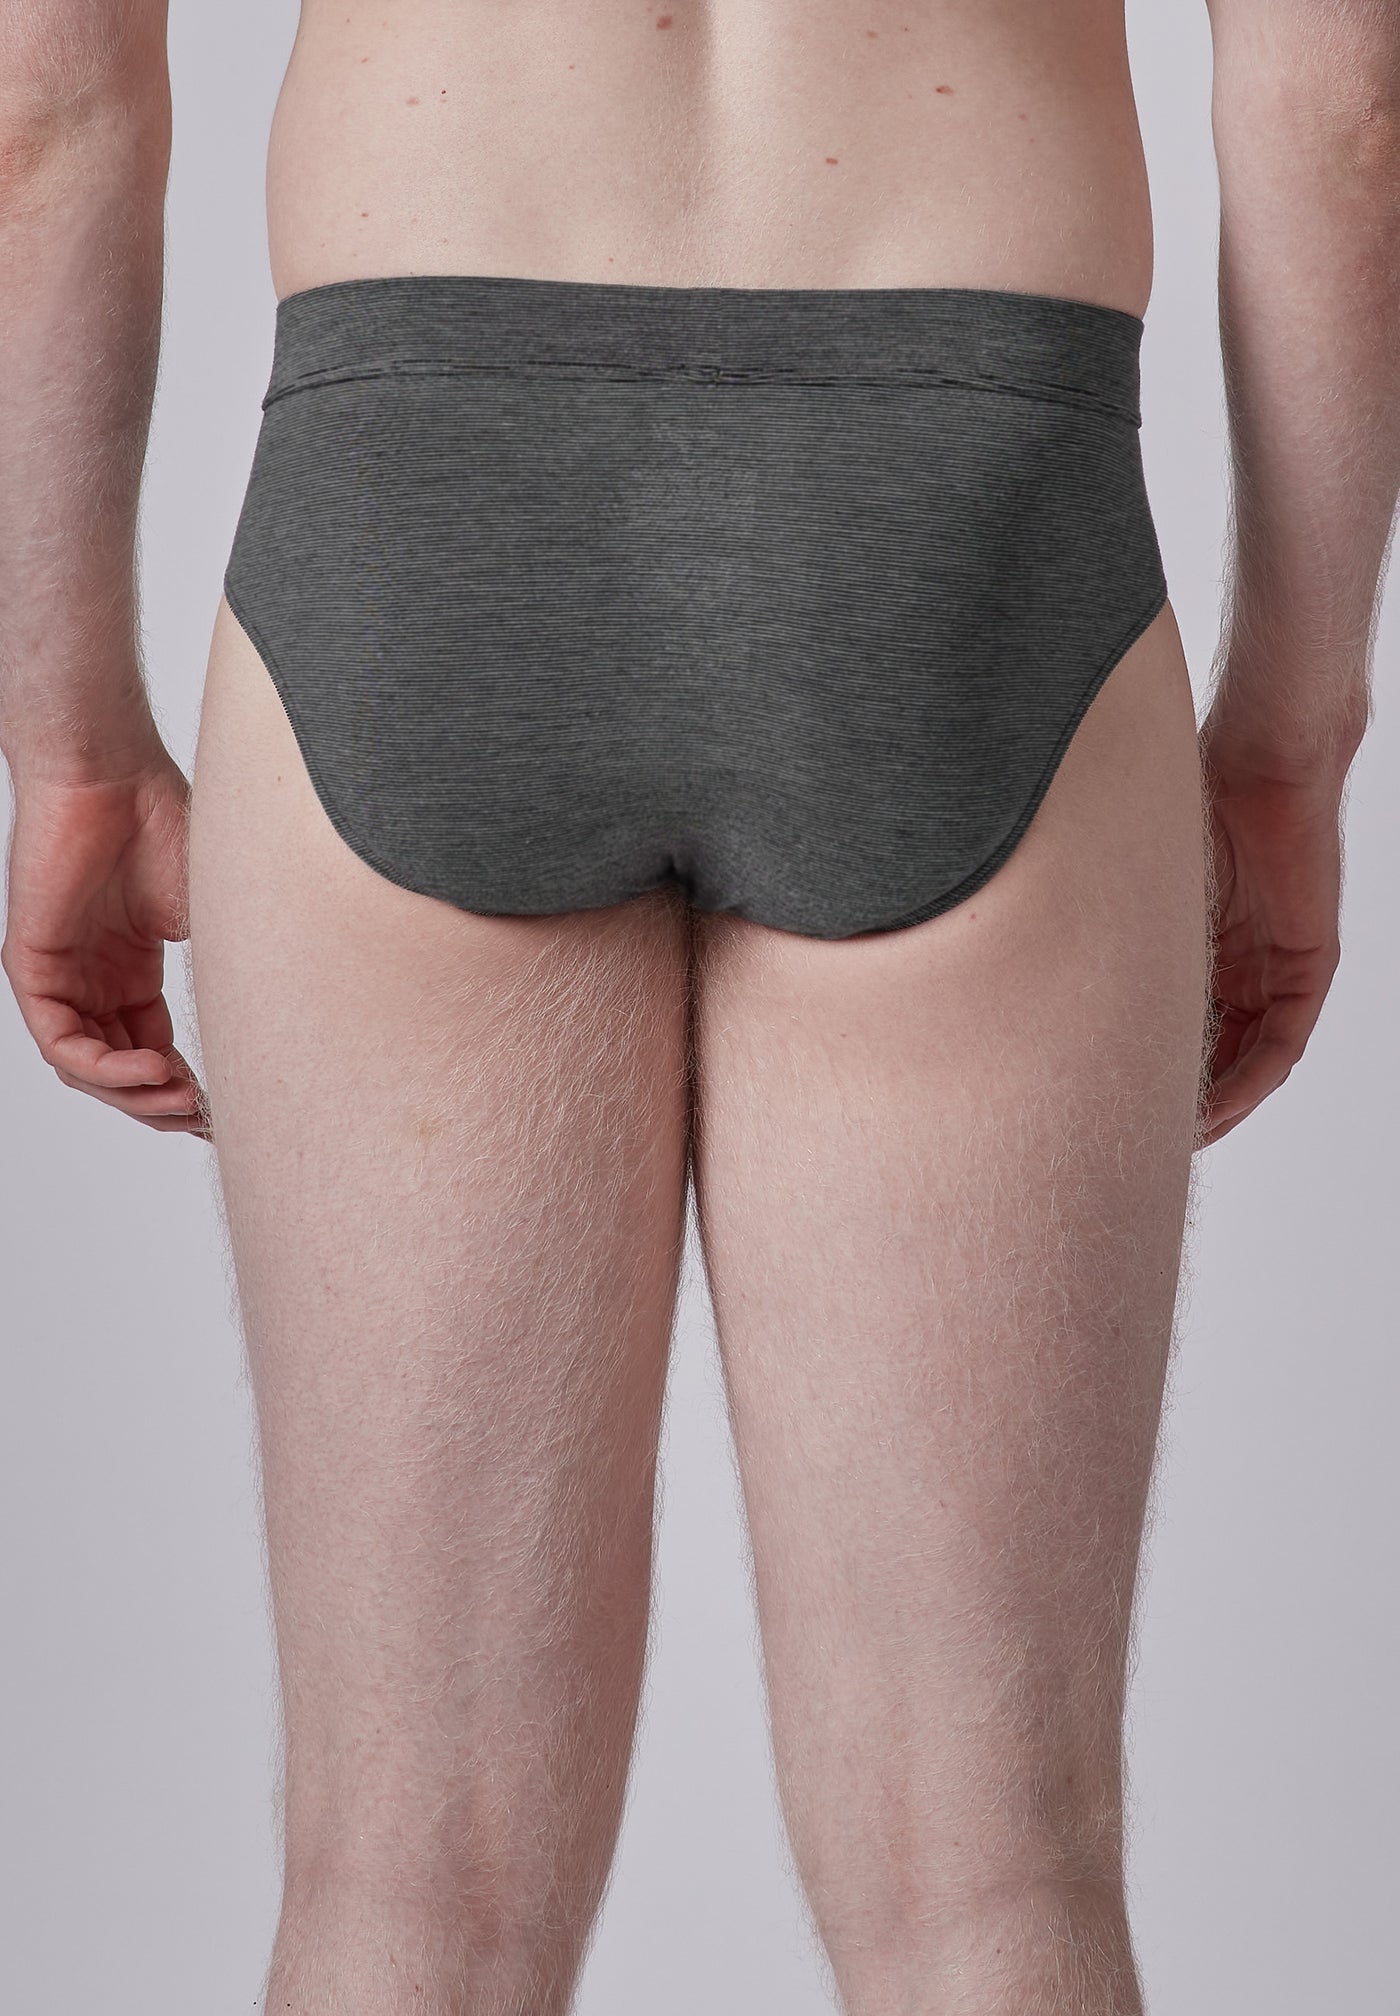 SKINY - Cooling Deluxe - Briefs